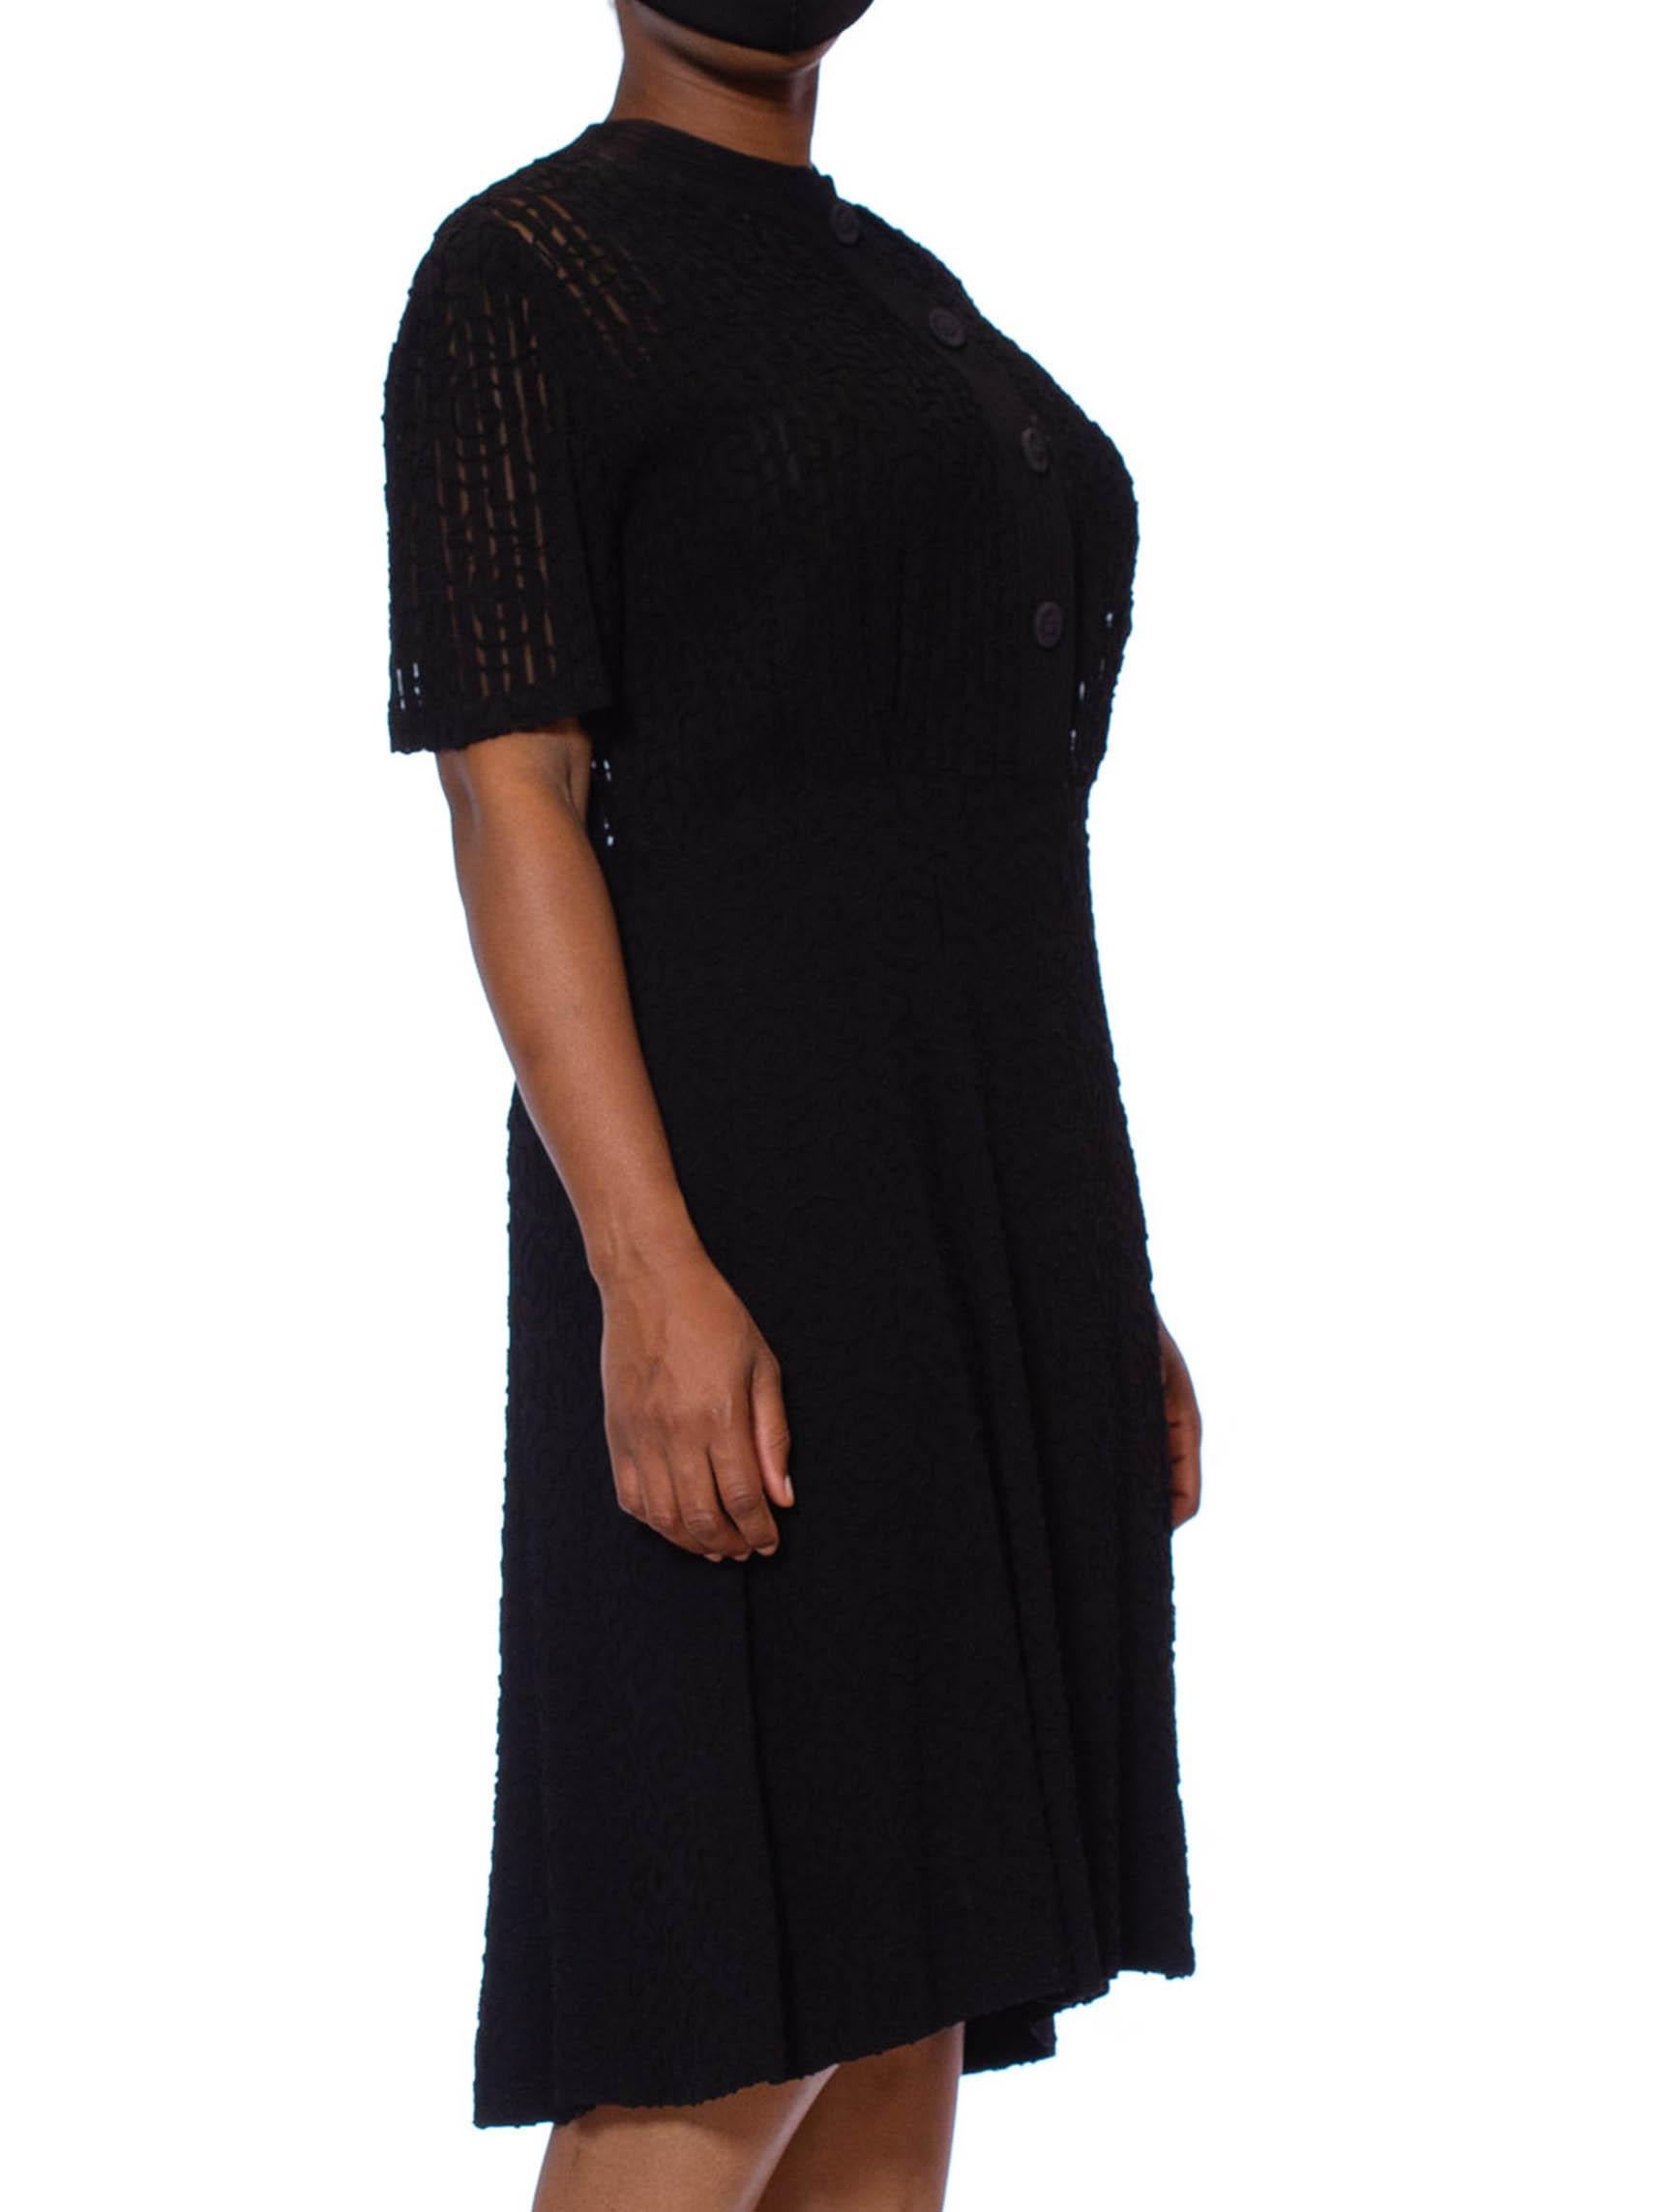 Women's 1940S Black Rayon Crepe Stripe Applique Dress With All Over Rope Embroidery For Sale